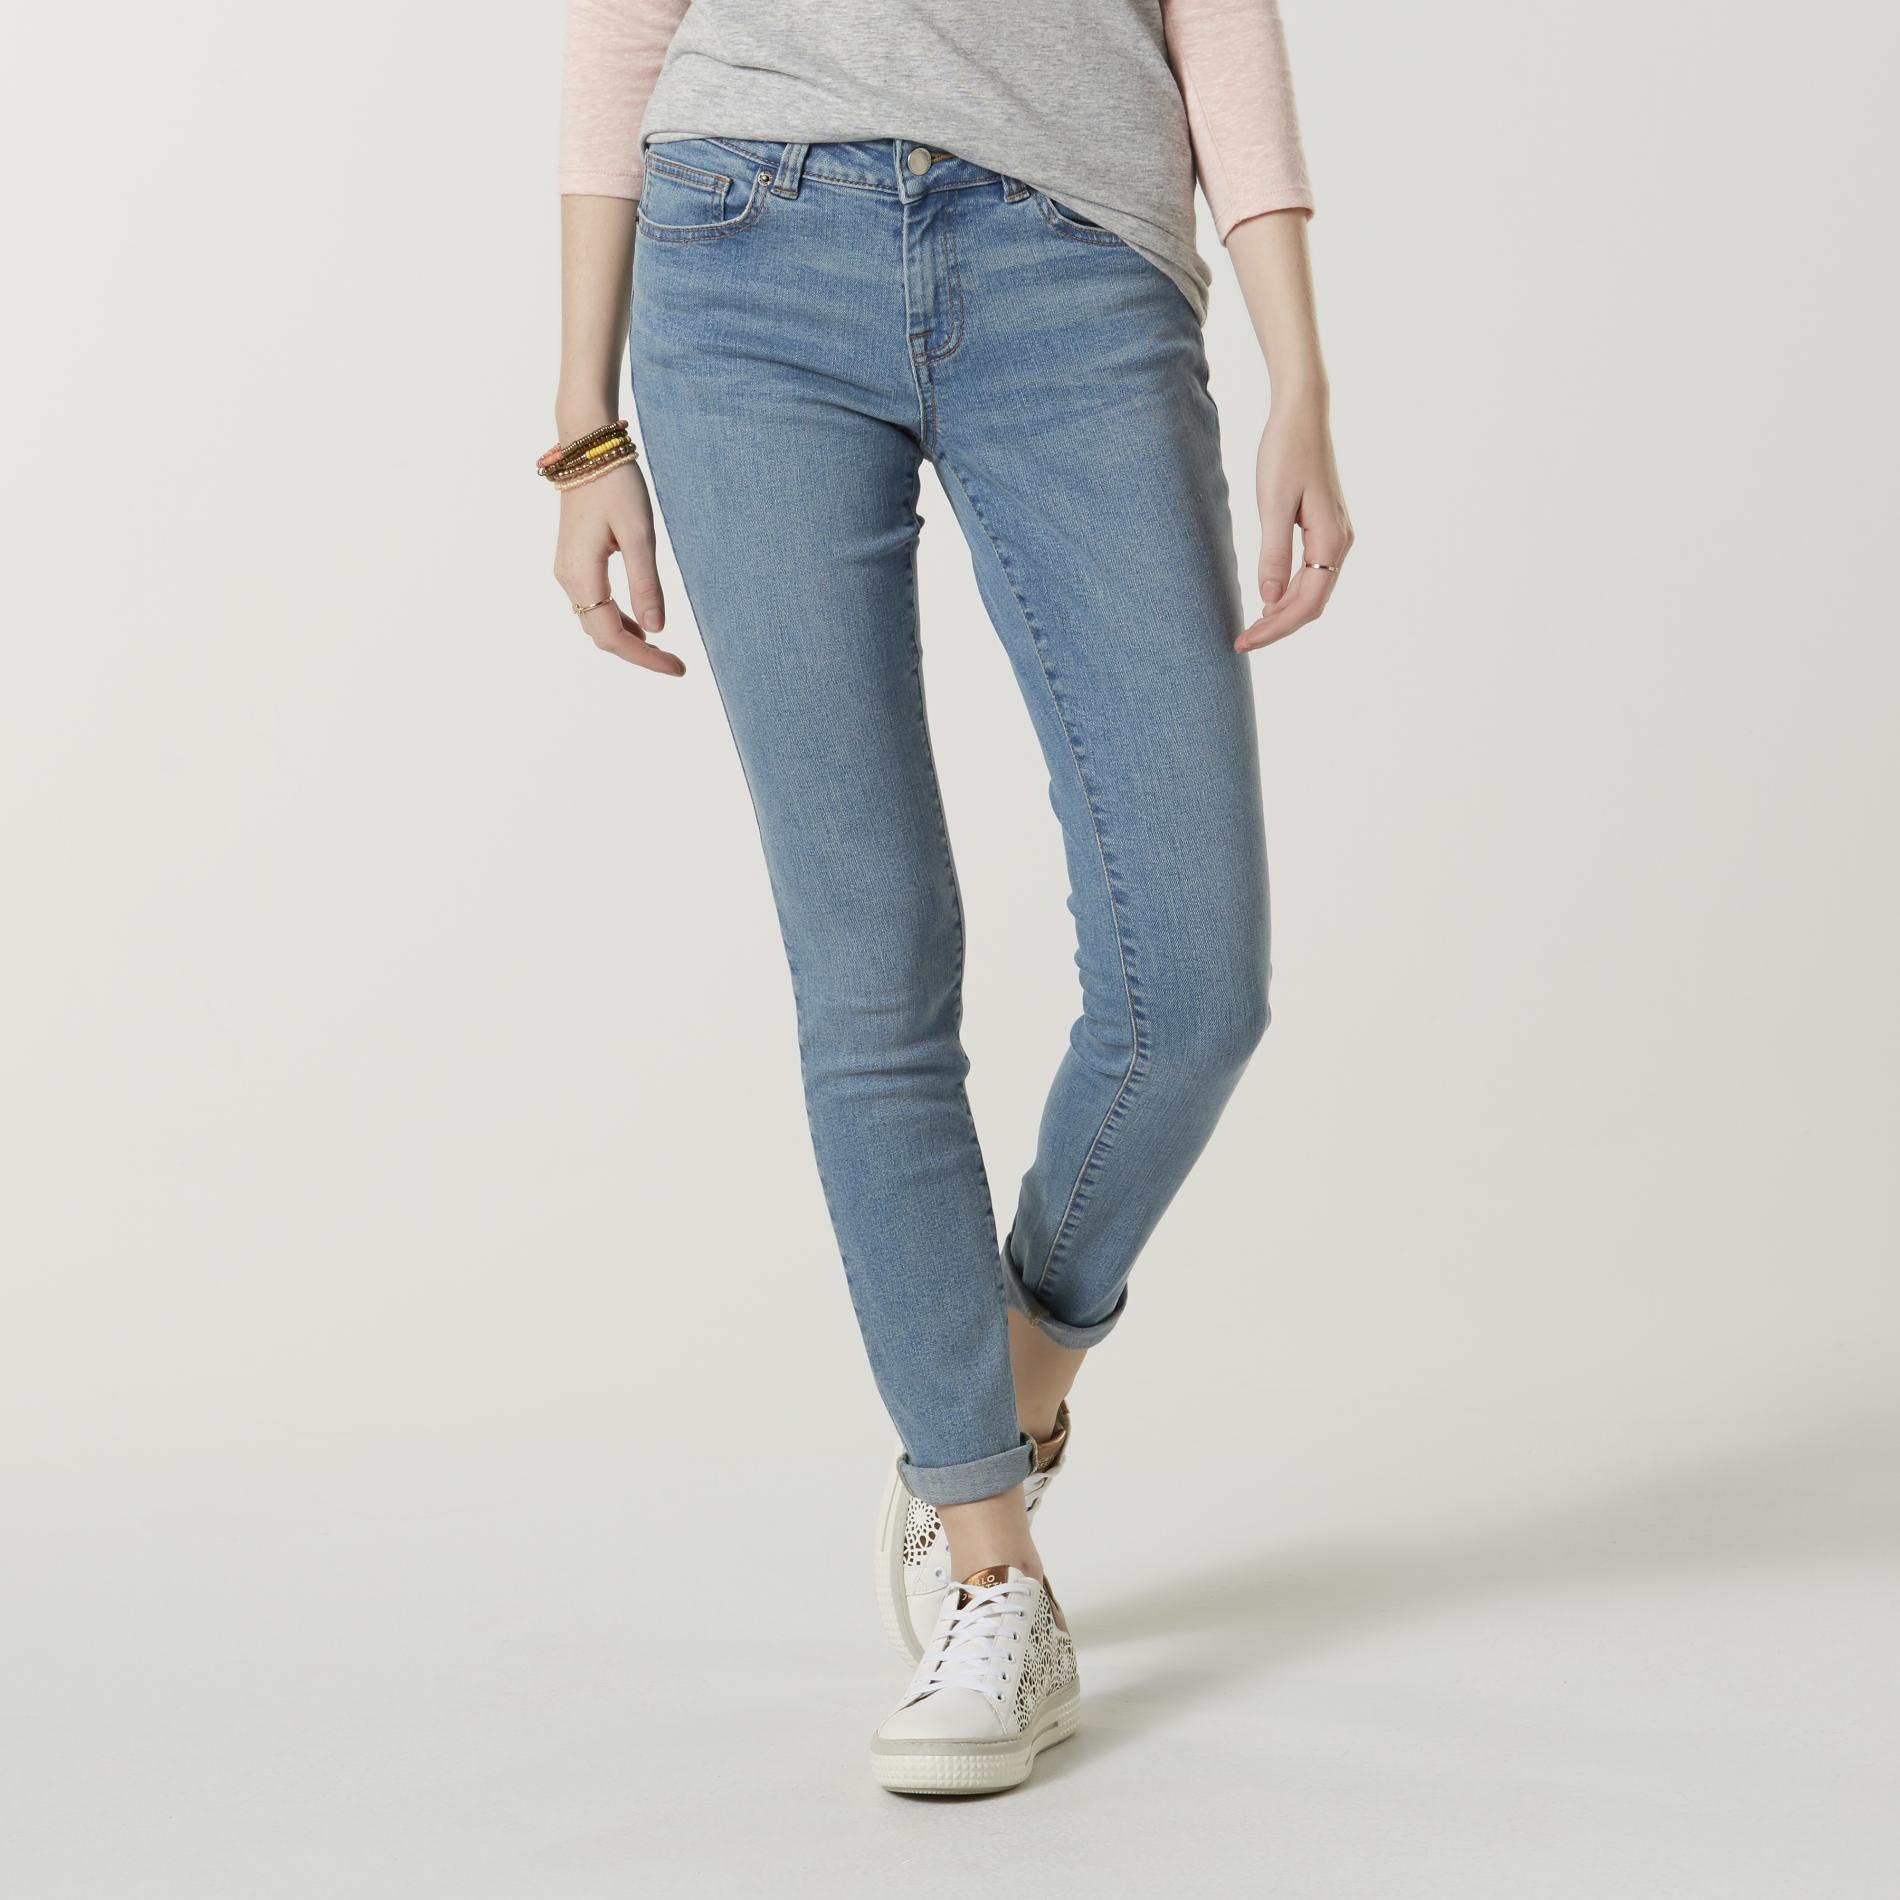 Route 66 Women's Skinny Jeans | Shop Your Way: Online Shopping & Earn ...